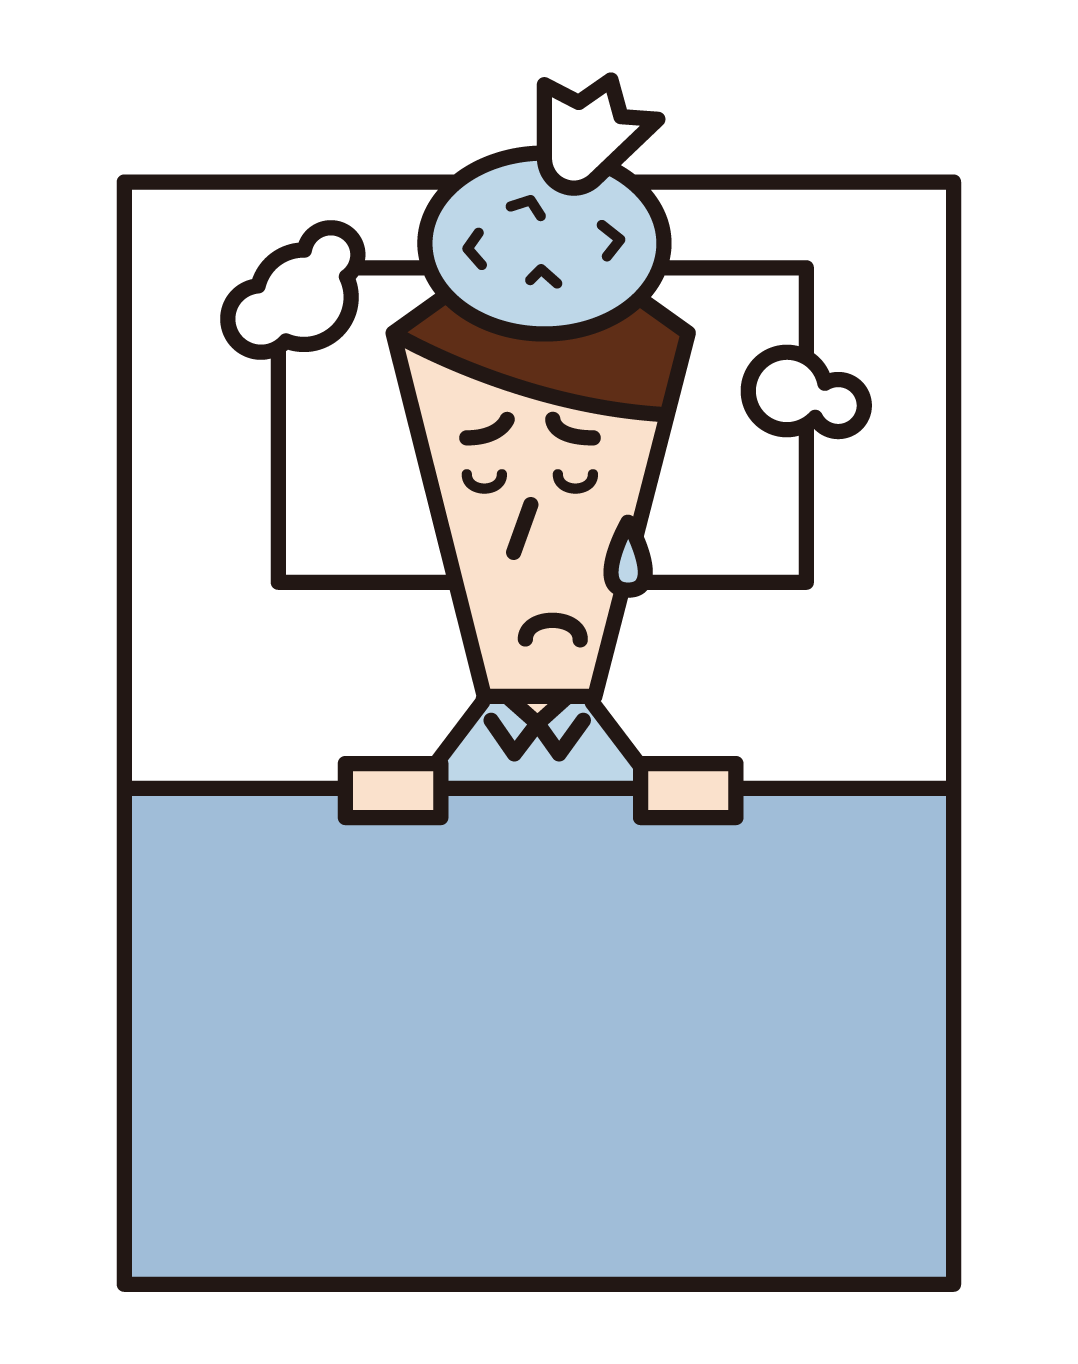 Illustration of a man who has a cold and goes to bed